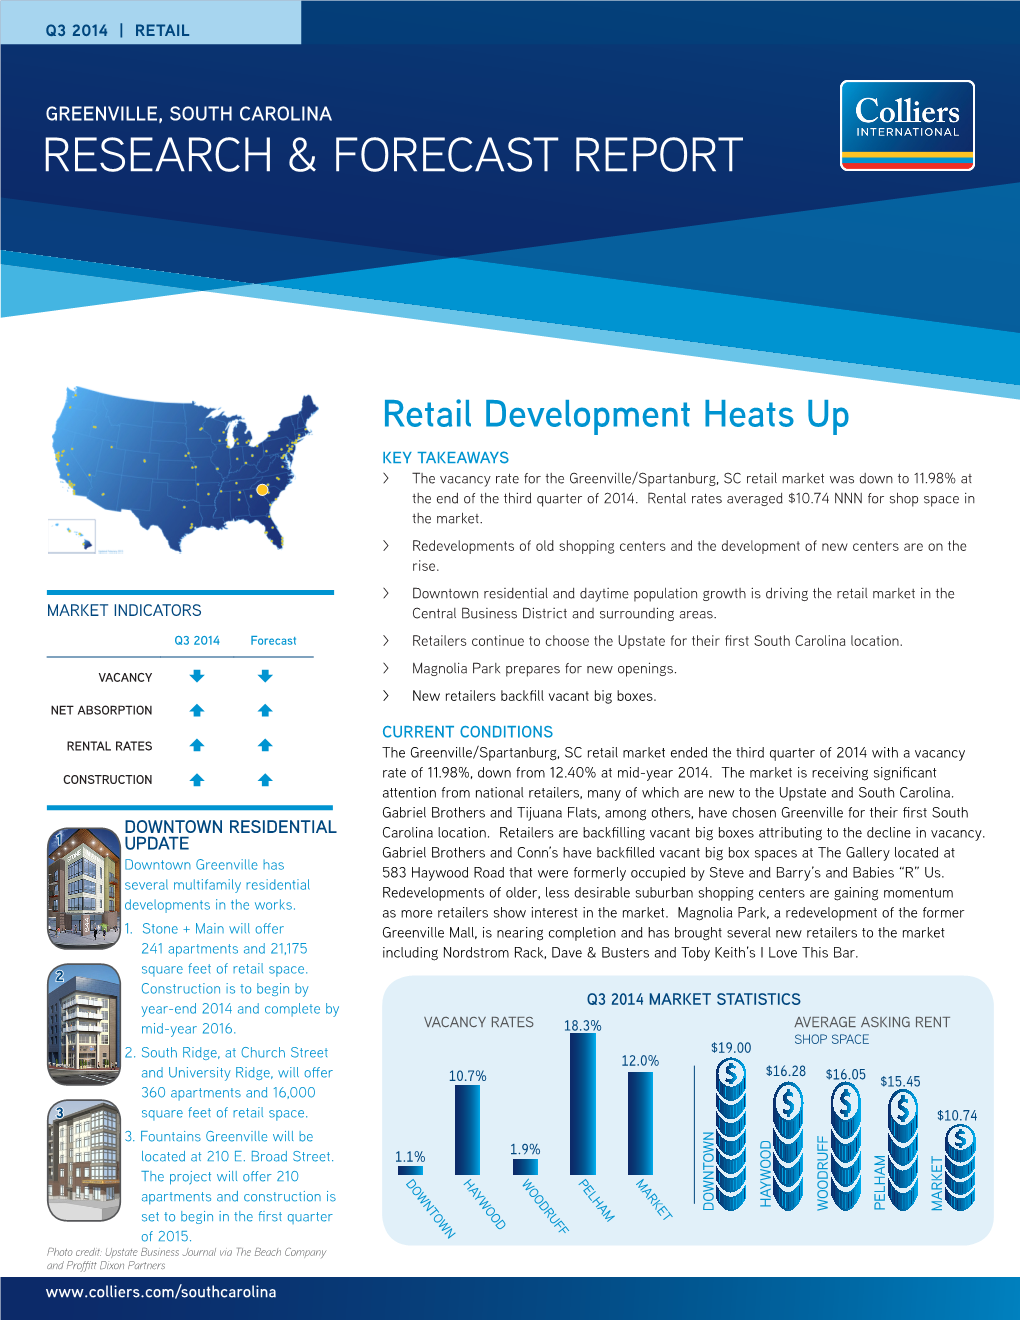 Research & Forecast Report